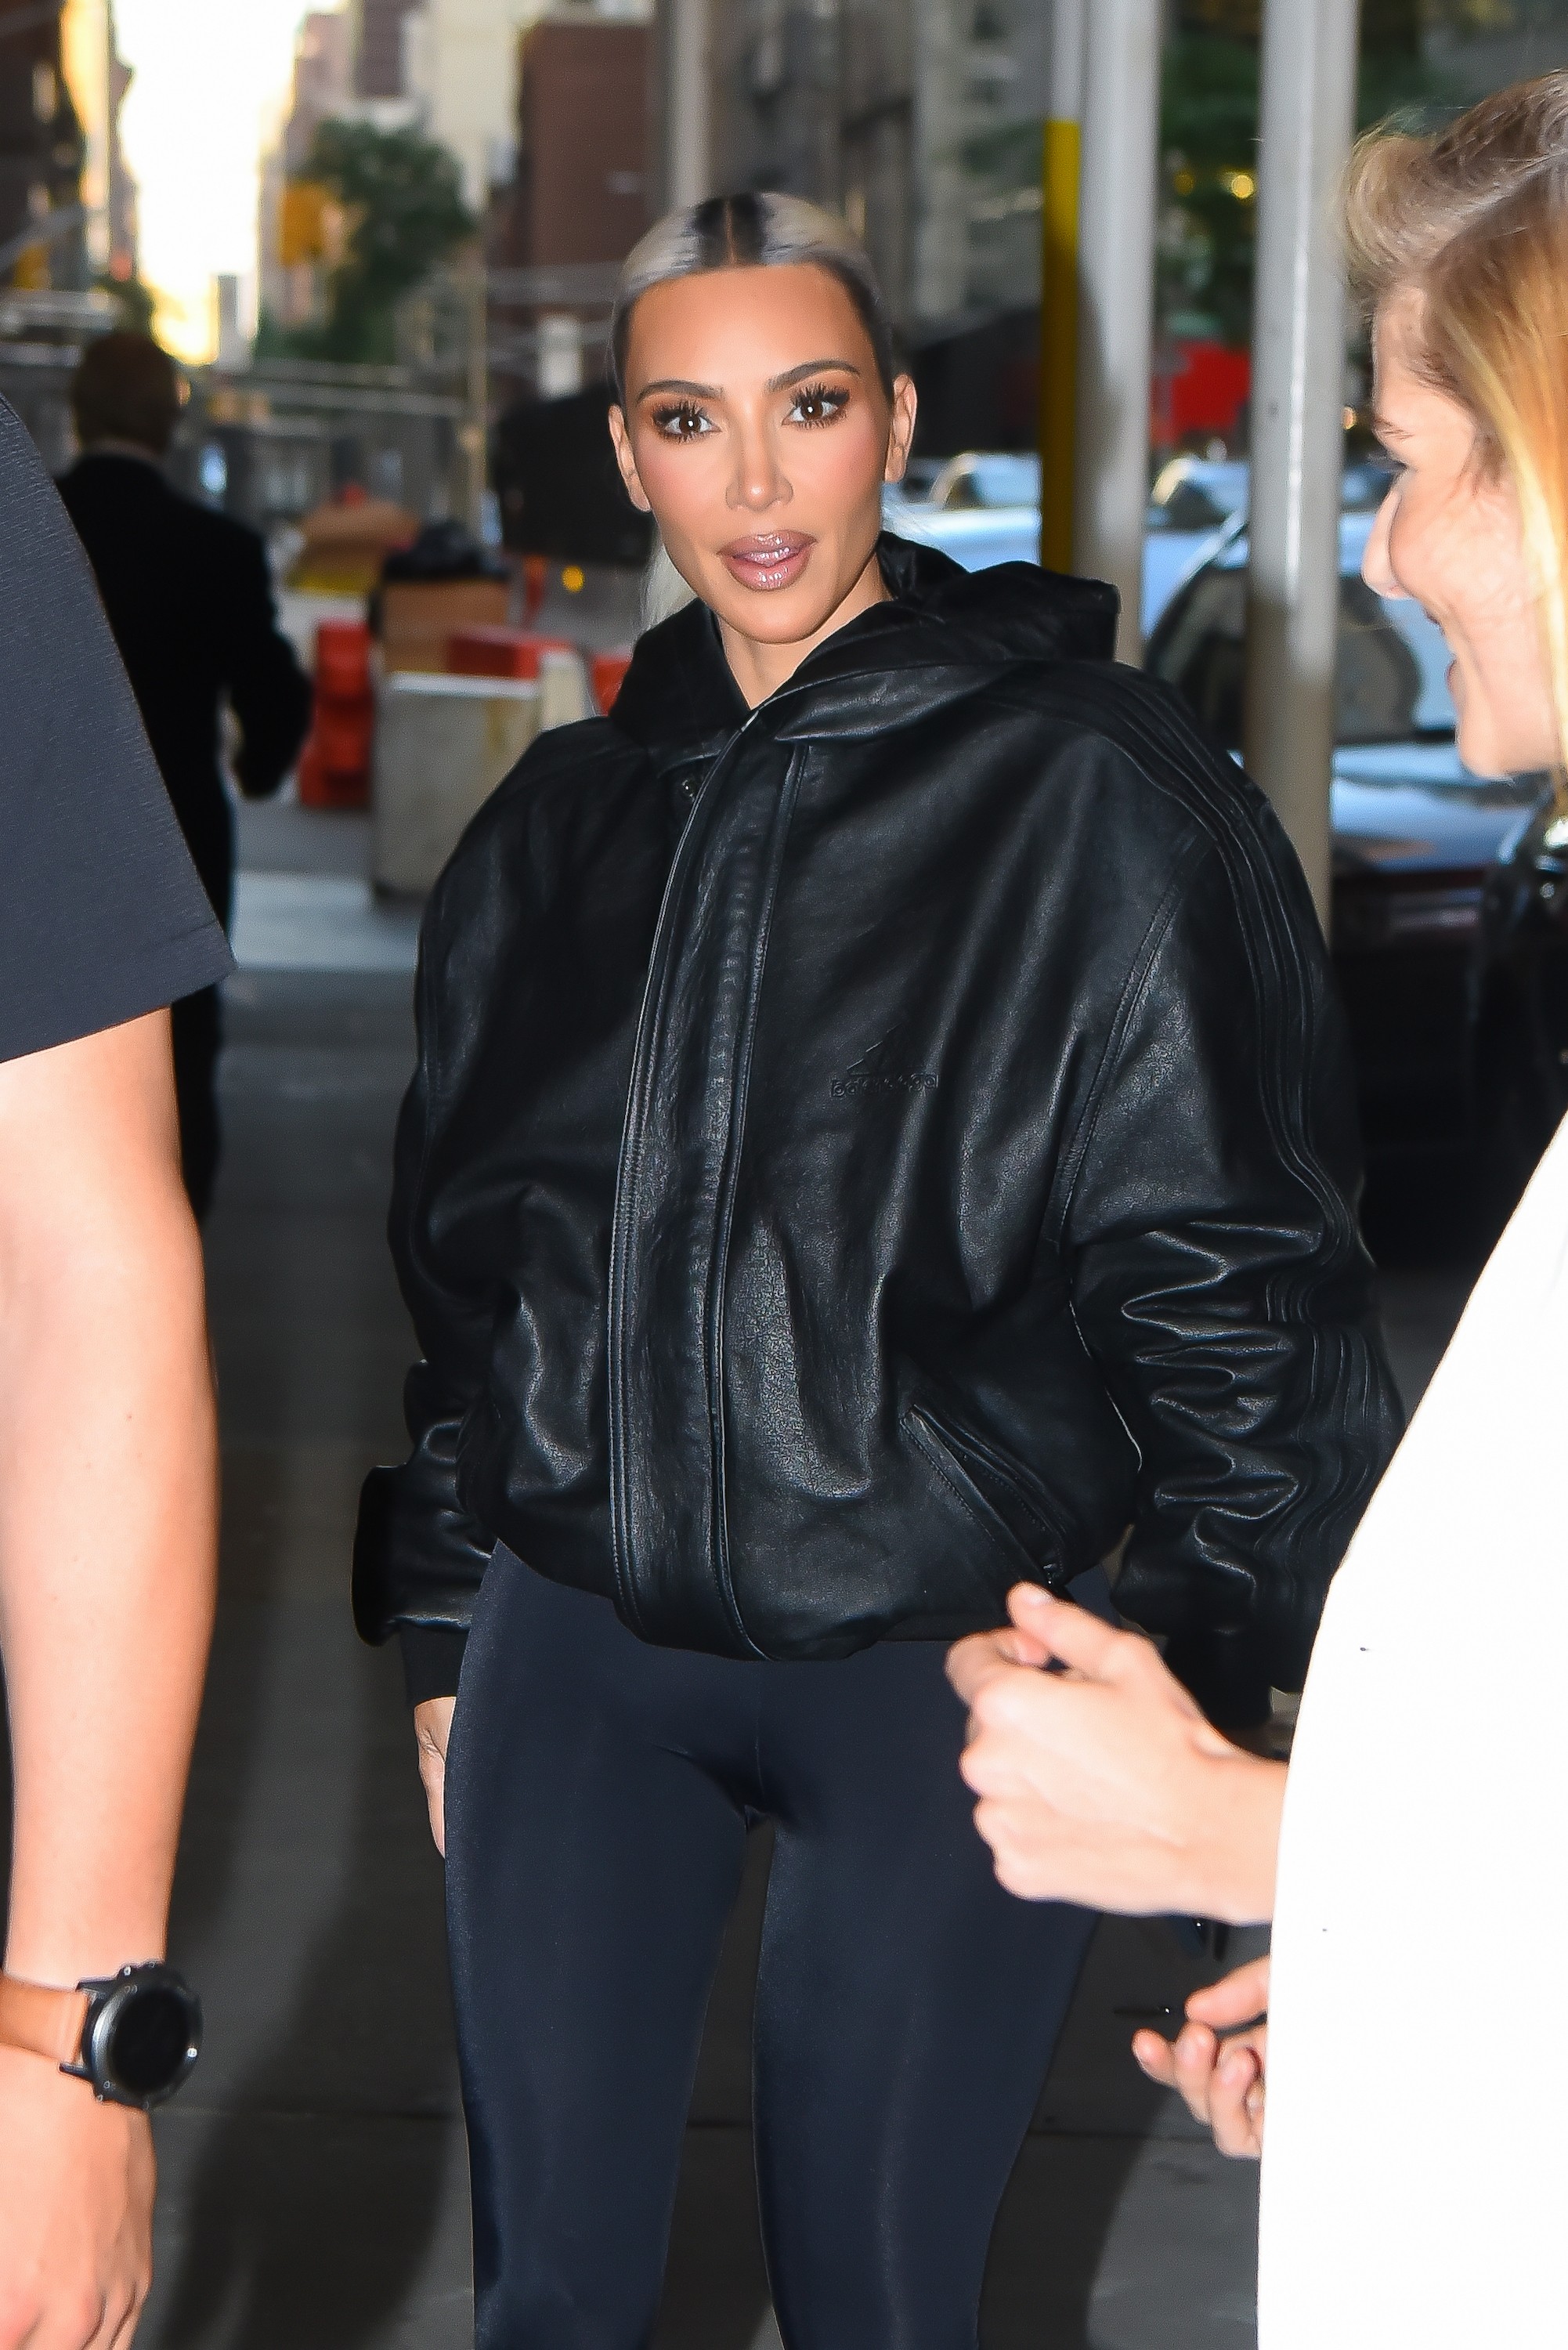 NEW YORK, NEW YORK - JULY 13: Kim Kardashian arrives at the Polo Bar Restaurant in Manhattan on July 13, 2022 in New York City. (Photo by Robert Kamau/GC Images) (Foto: GC Images)